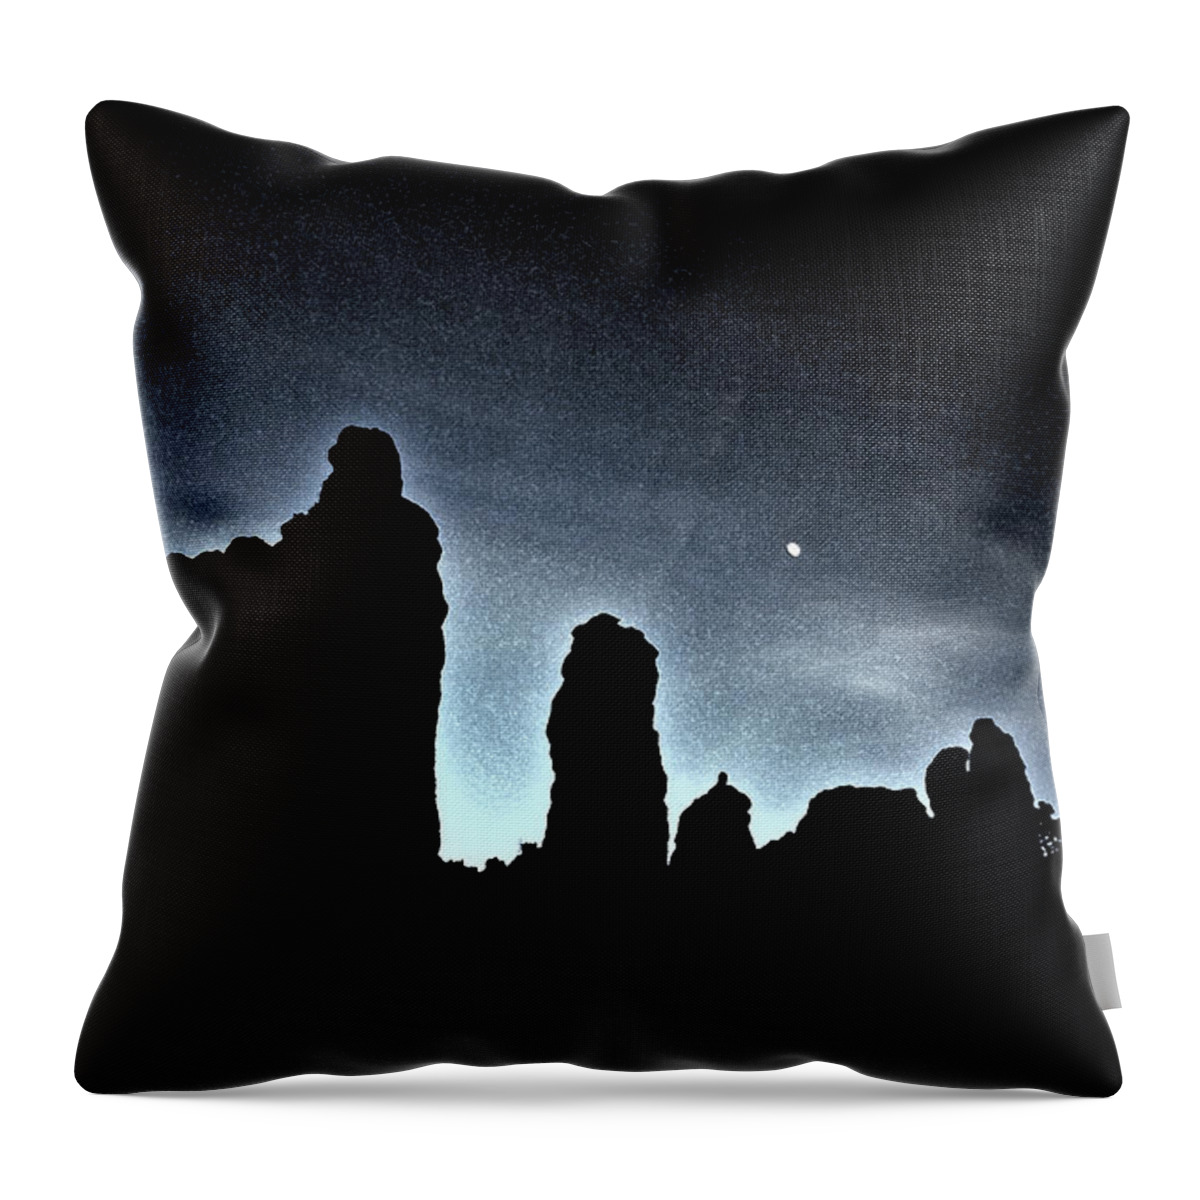  Snoopy Throw Pillow featuring the photograph Good Night Snoopy by Tom Kelly